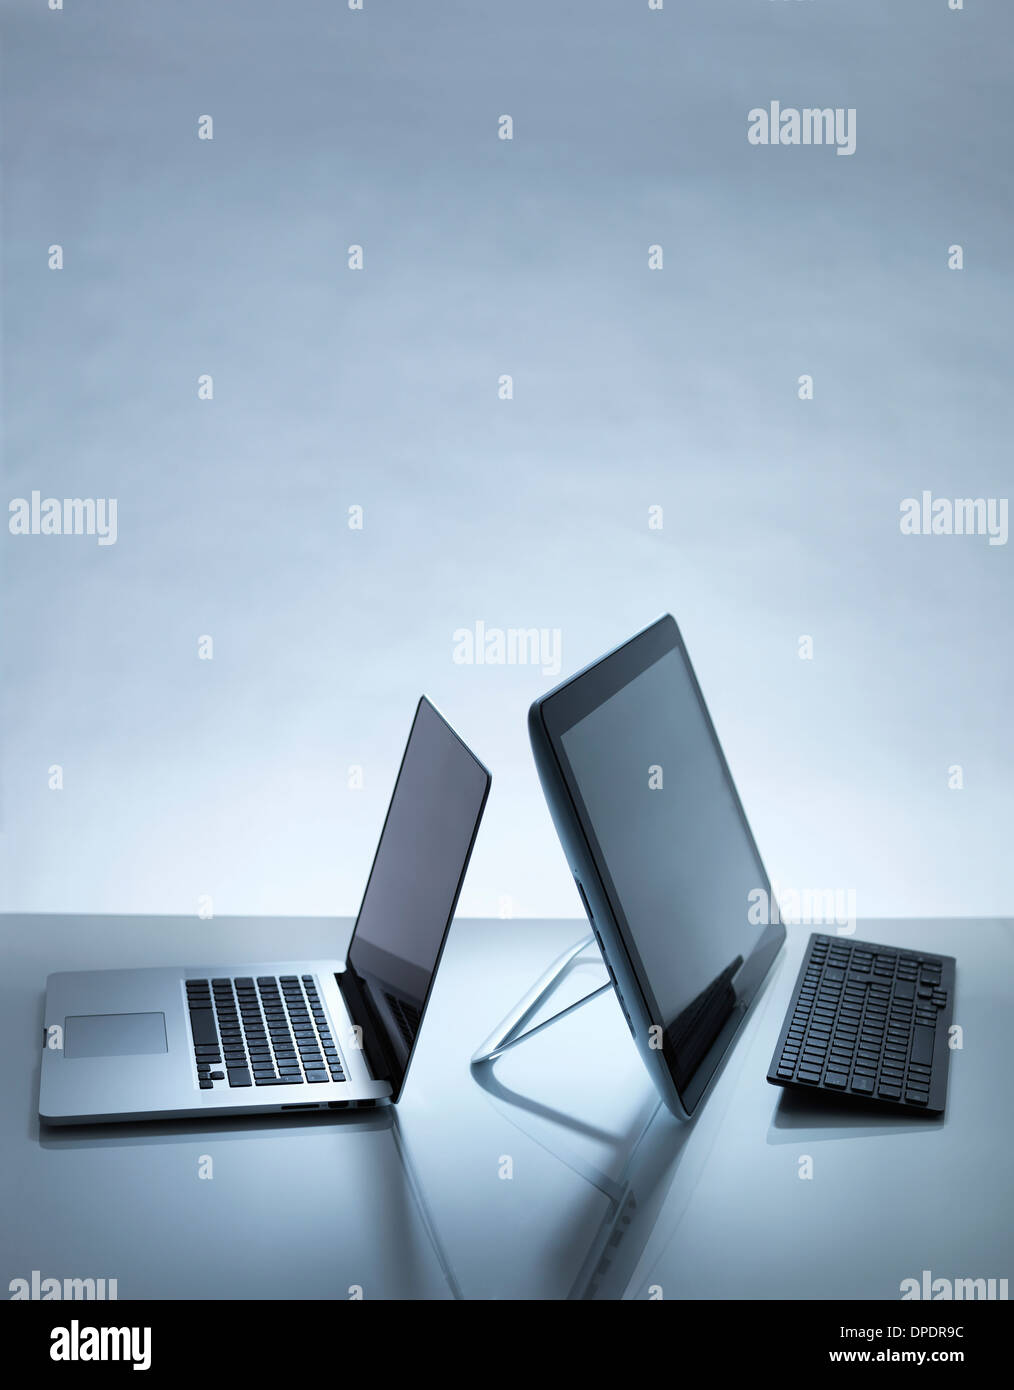 Laptop and PC on desk Stock Photo